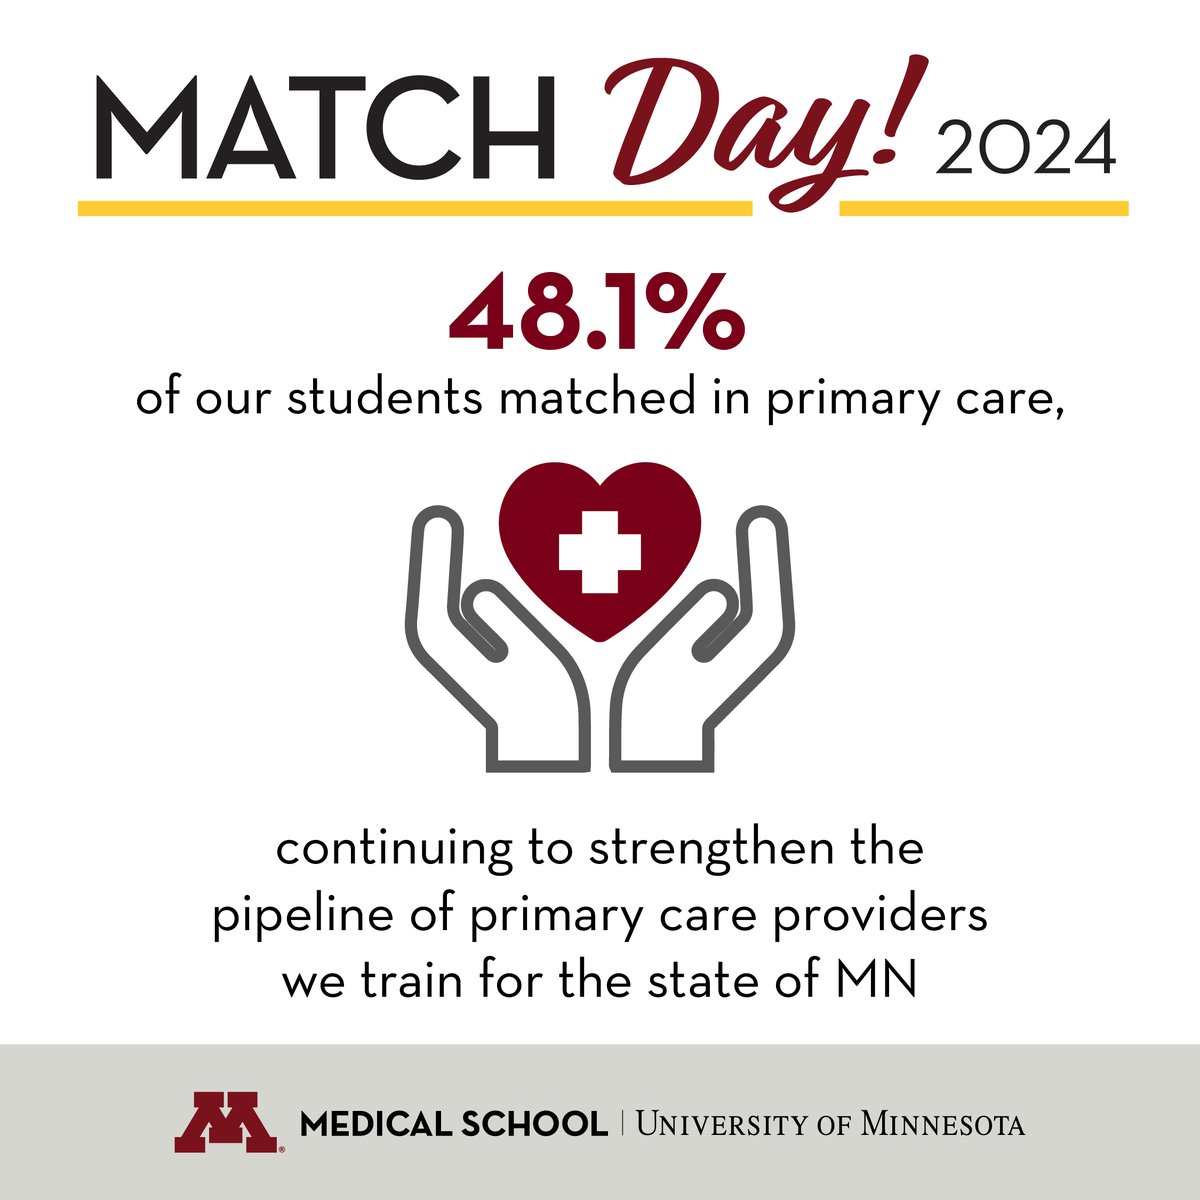 #FamilyMedicine for the win! 48.1% of @umnmedschool students matched into primary care. ❤️🧡💛💚💙💜 

#Match2024 #UMNMatchDay2024